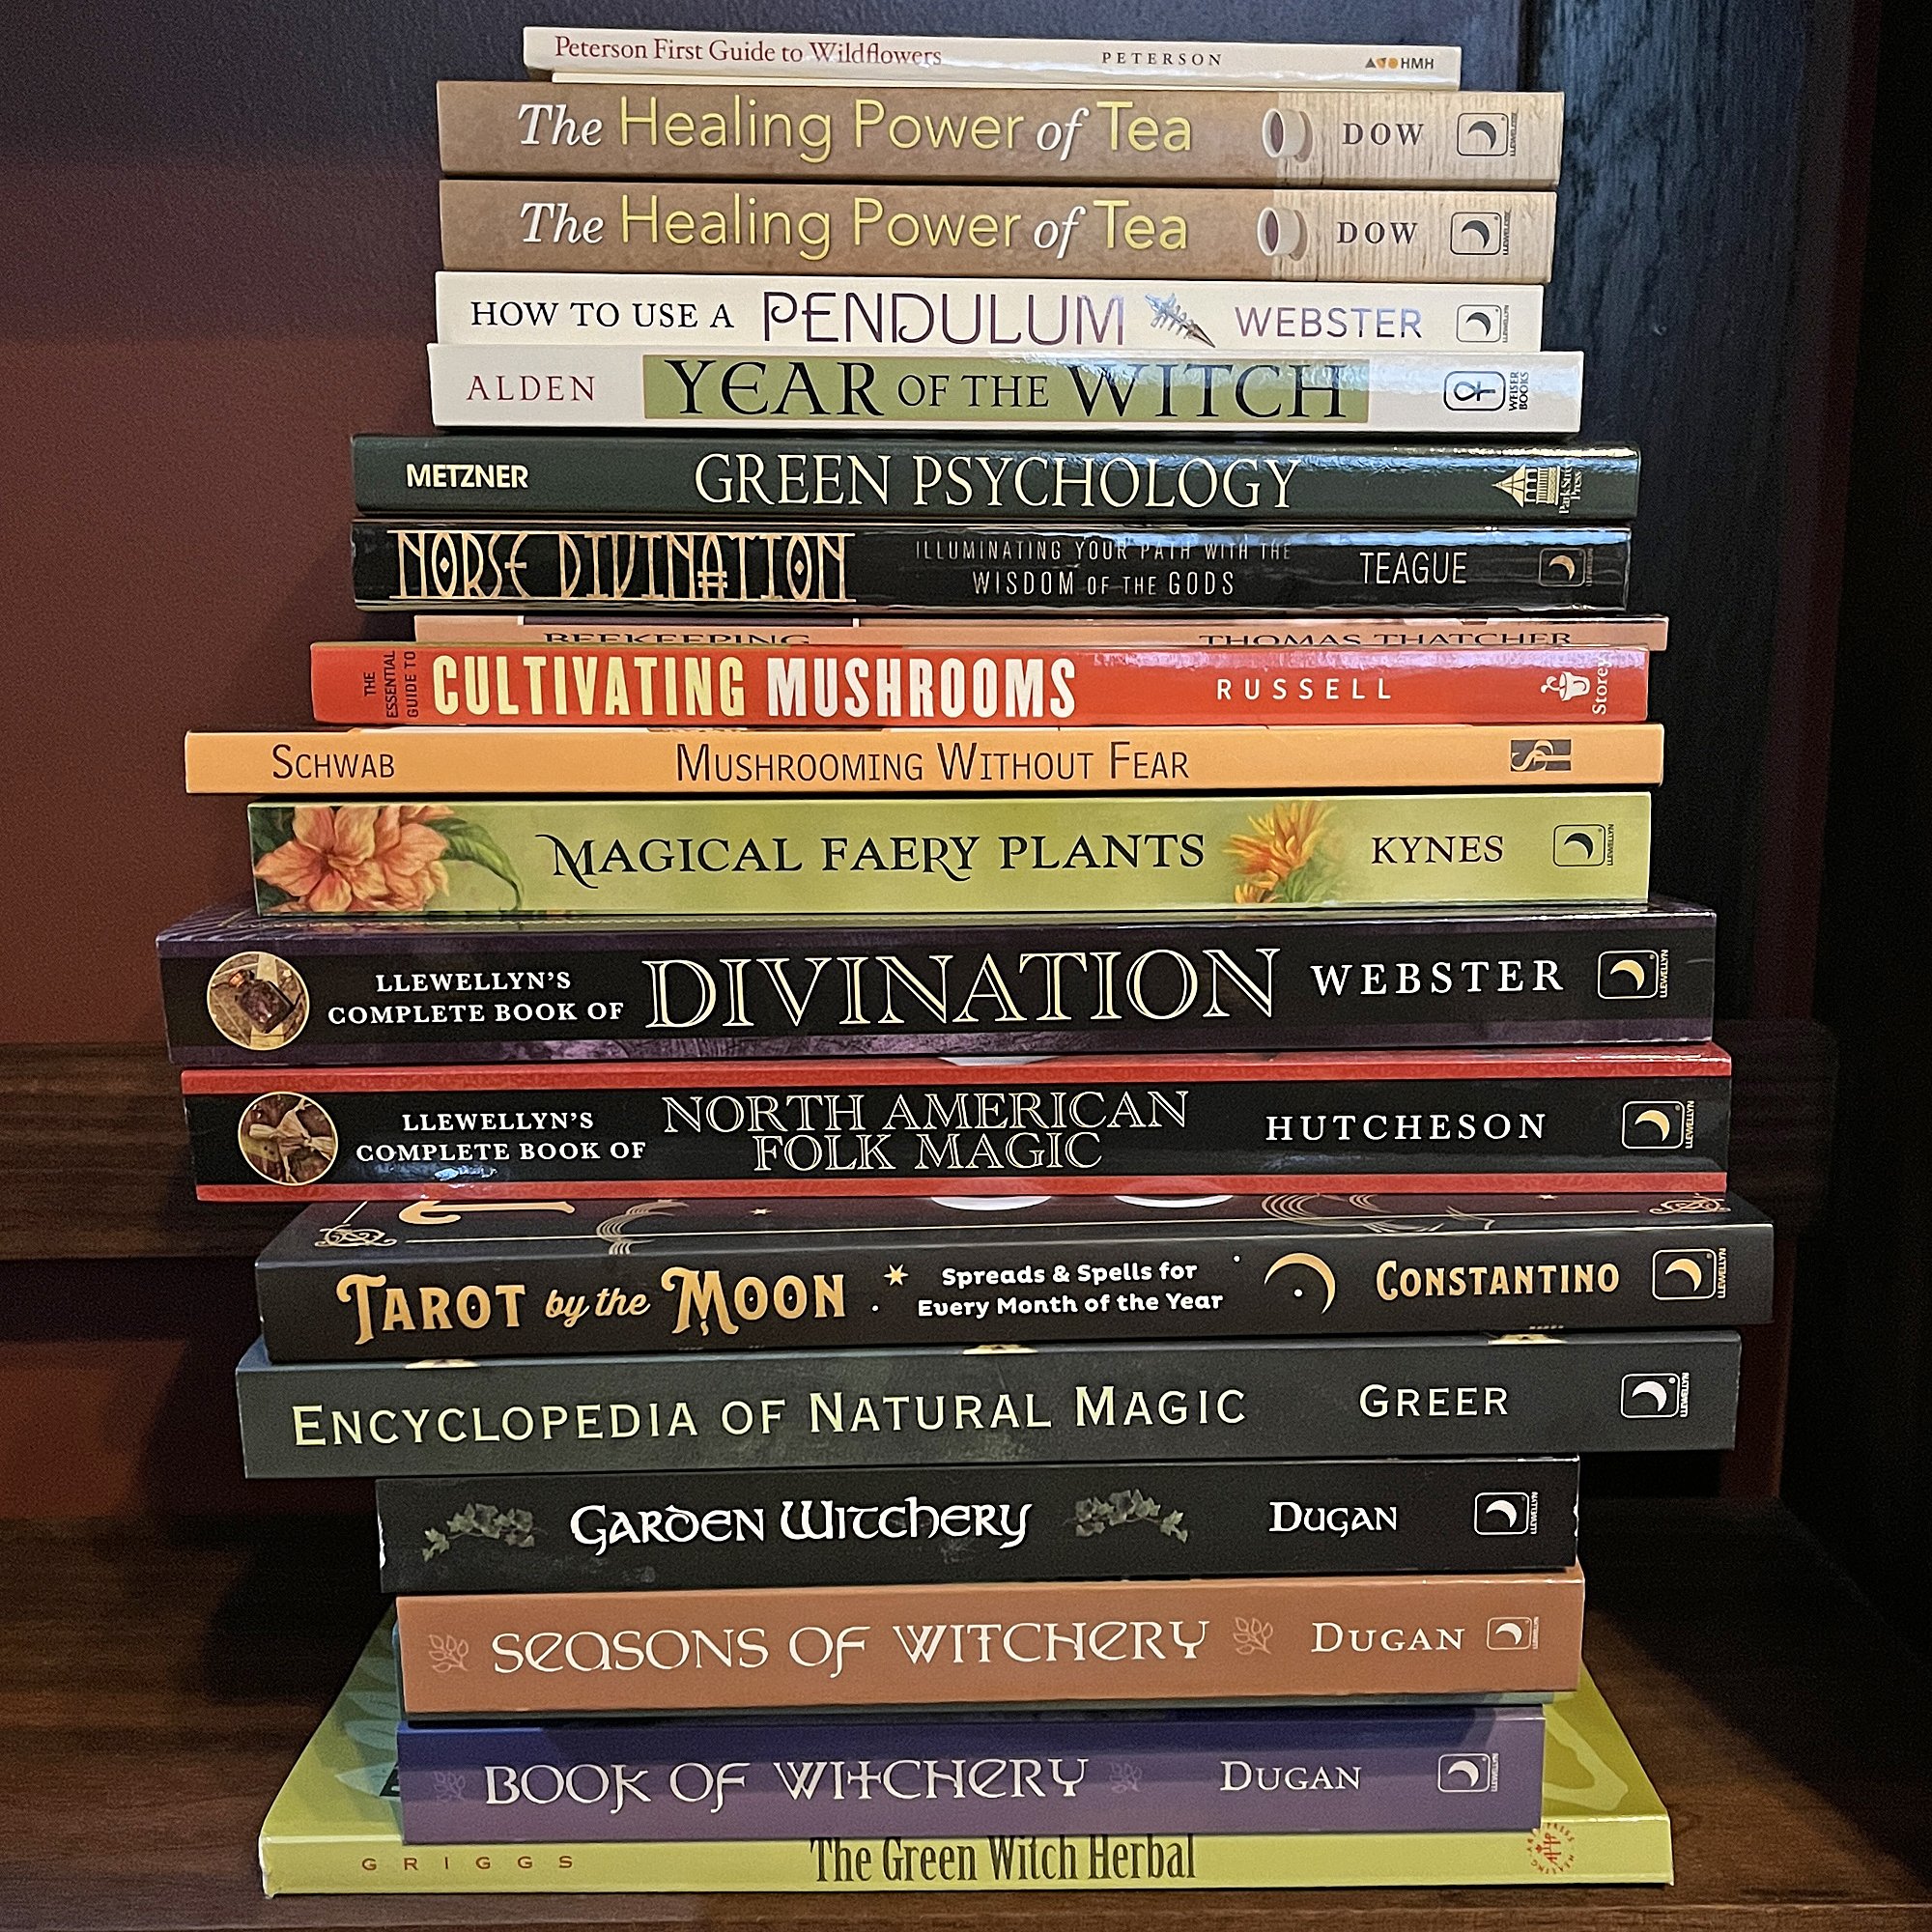 We're closing out several books from our inventory. All those shown in the photo above are 40% off. Visit greenwitchvintage.com to get yours!

#booksale #40percentoff #witchybooksale #witchysale #paganbooks #pagansale #books #witchbooks #greenwitchvi